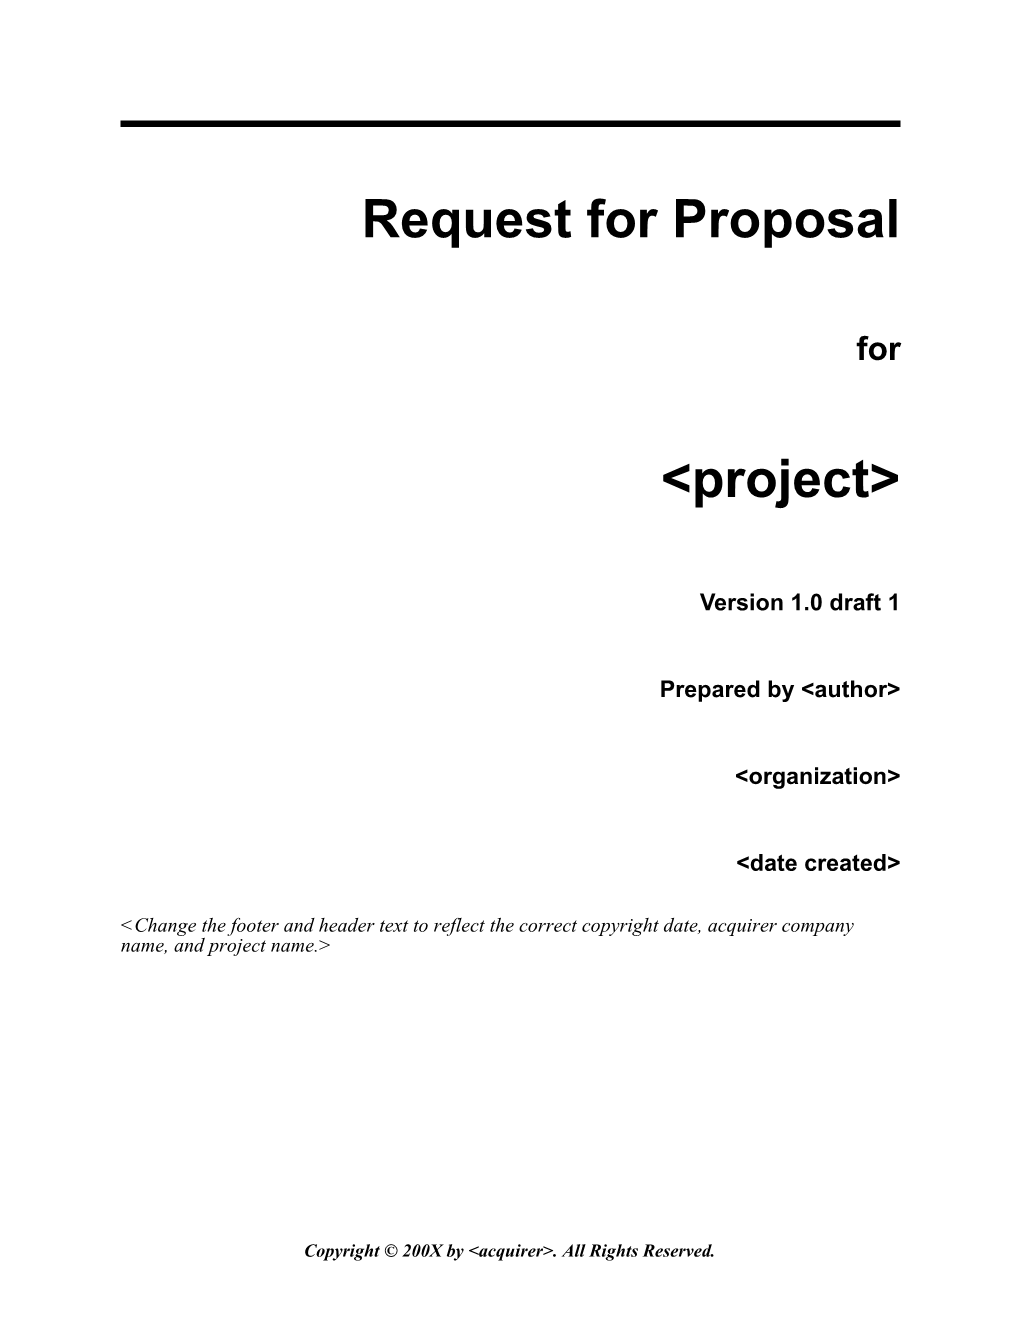 Request for Proposal s29